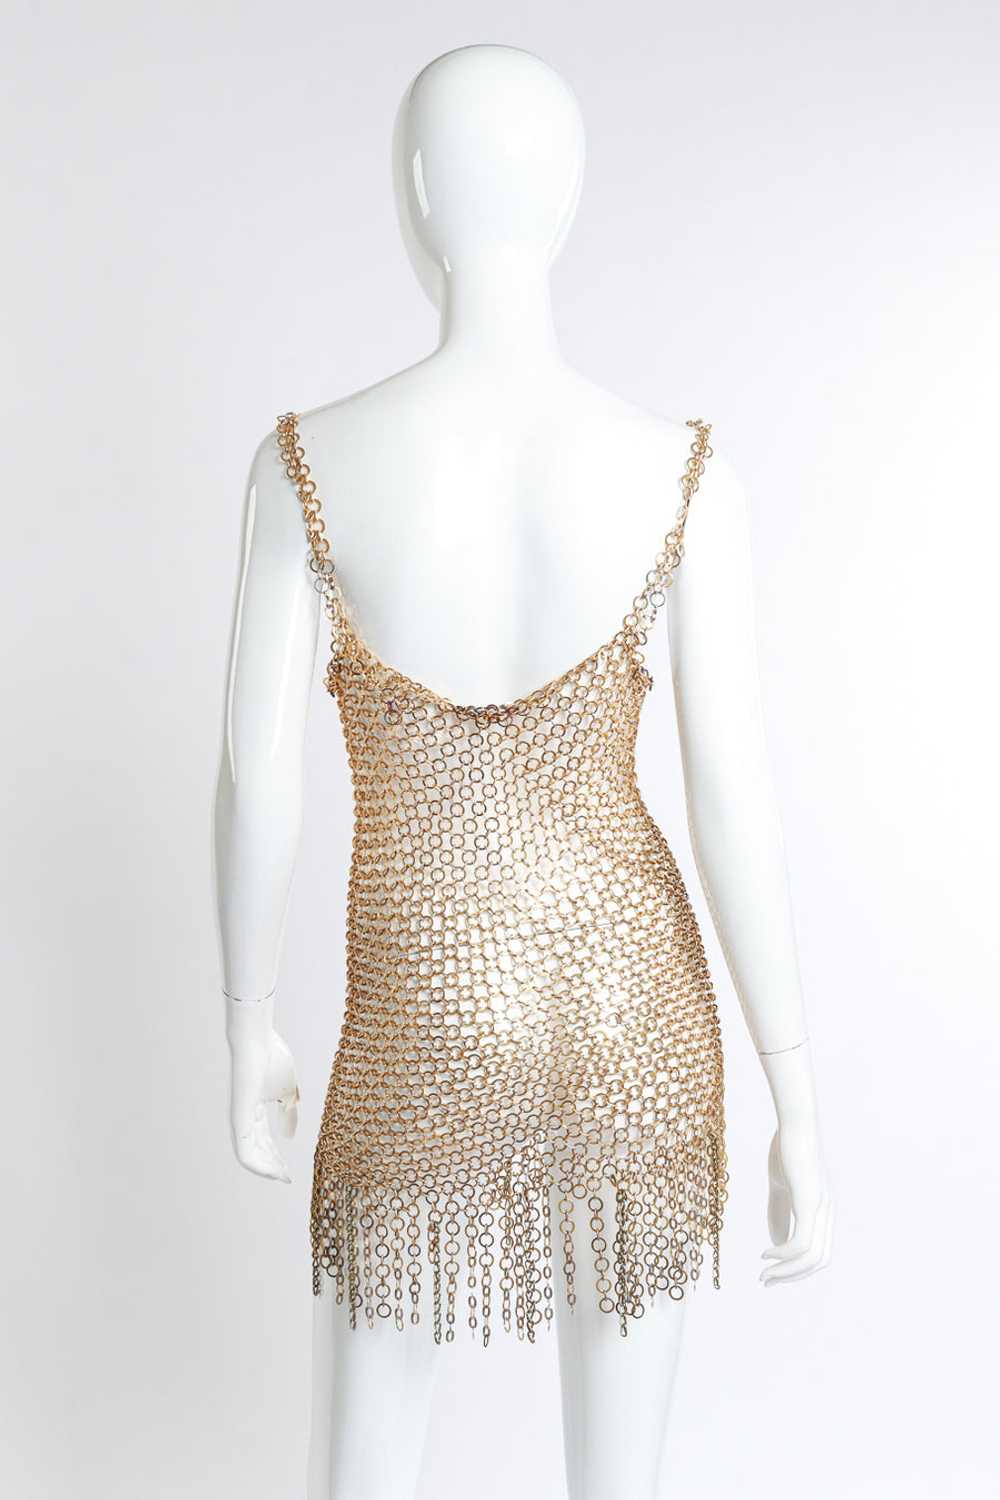 Ring Link Chain Dress - image 3